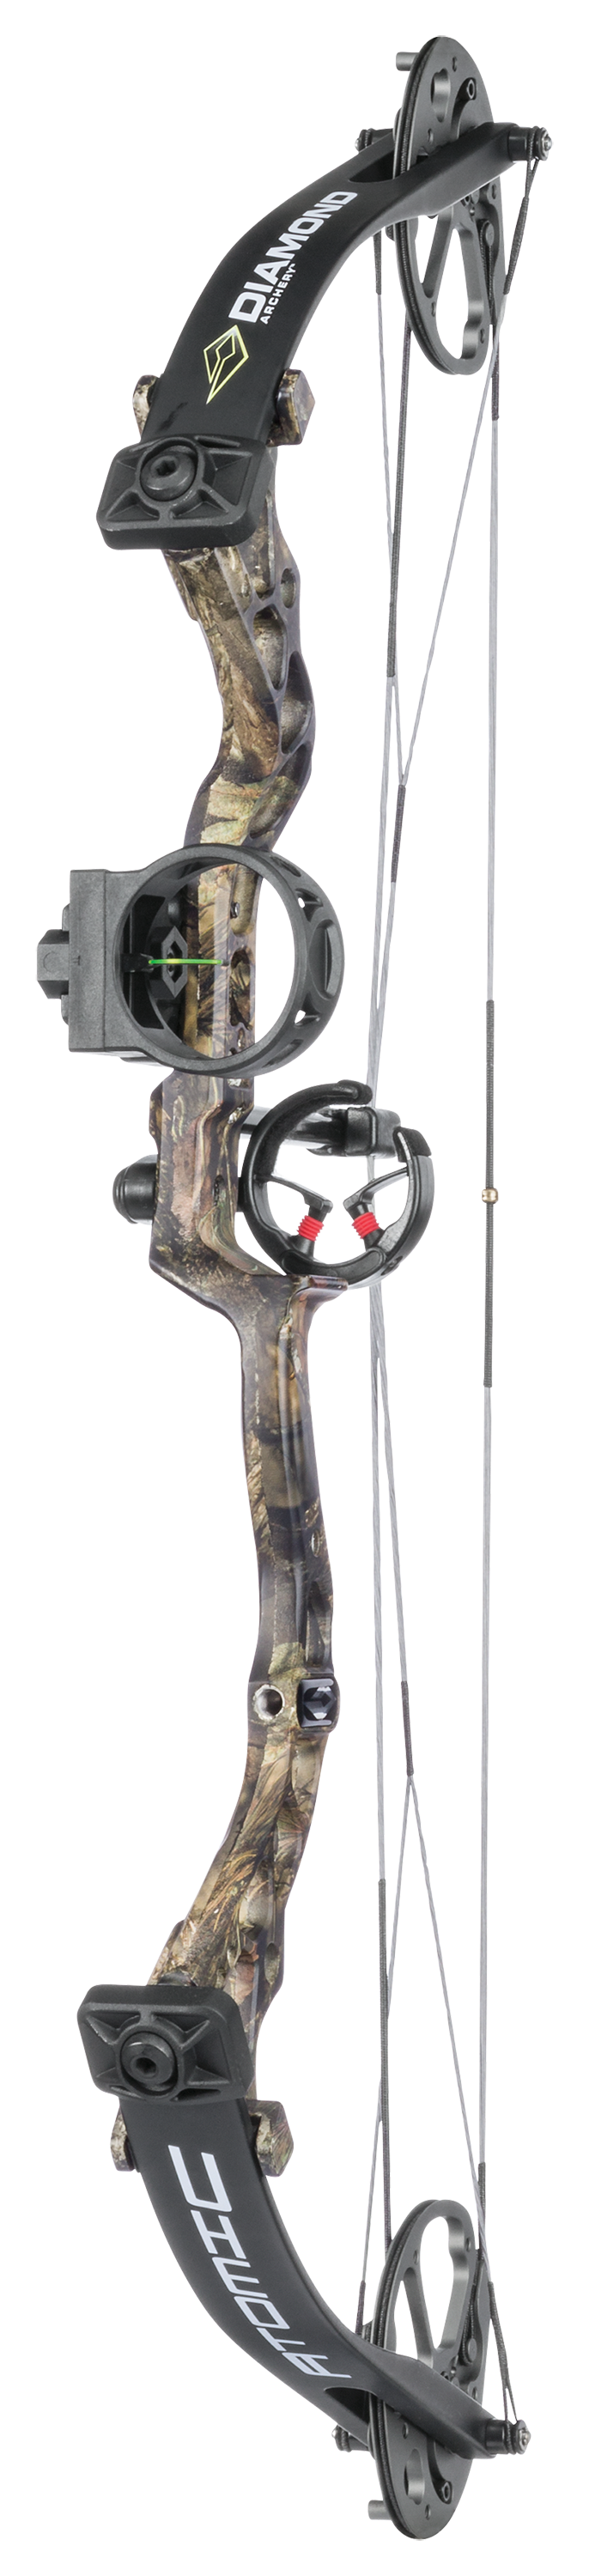 Diamond by Bowtech Atomic Youth Compound Bow Package - Right Hand - Mossy Oak Break-Up Country